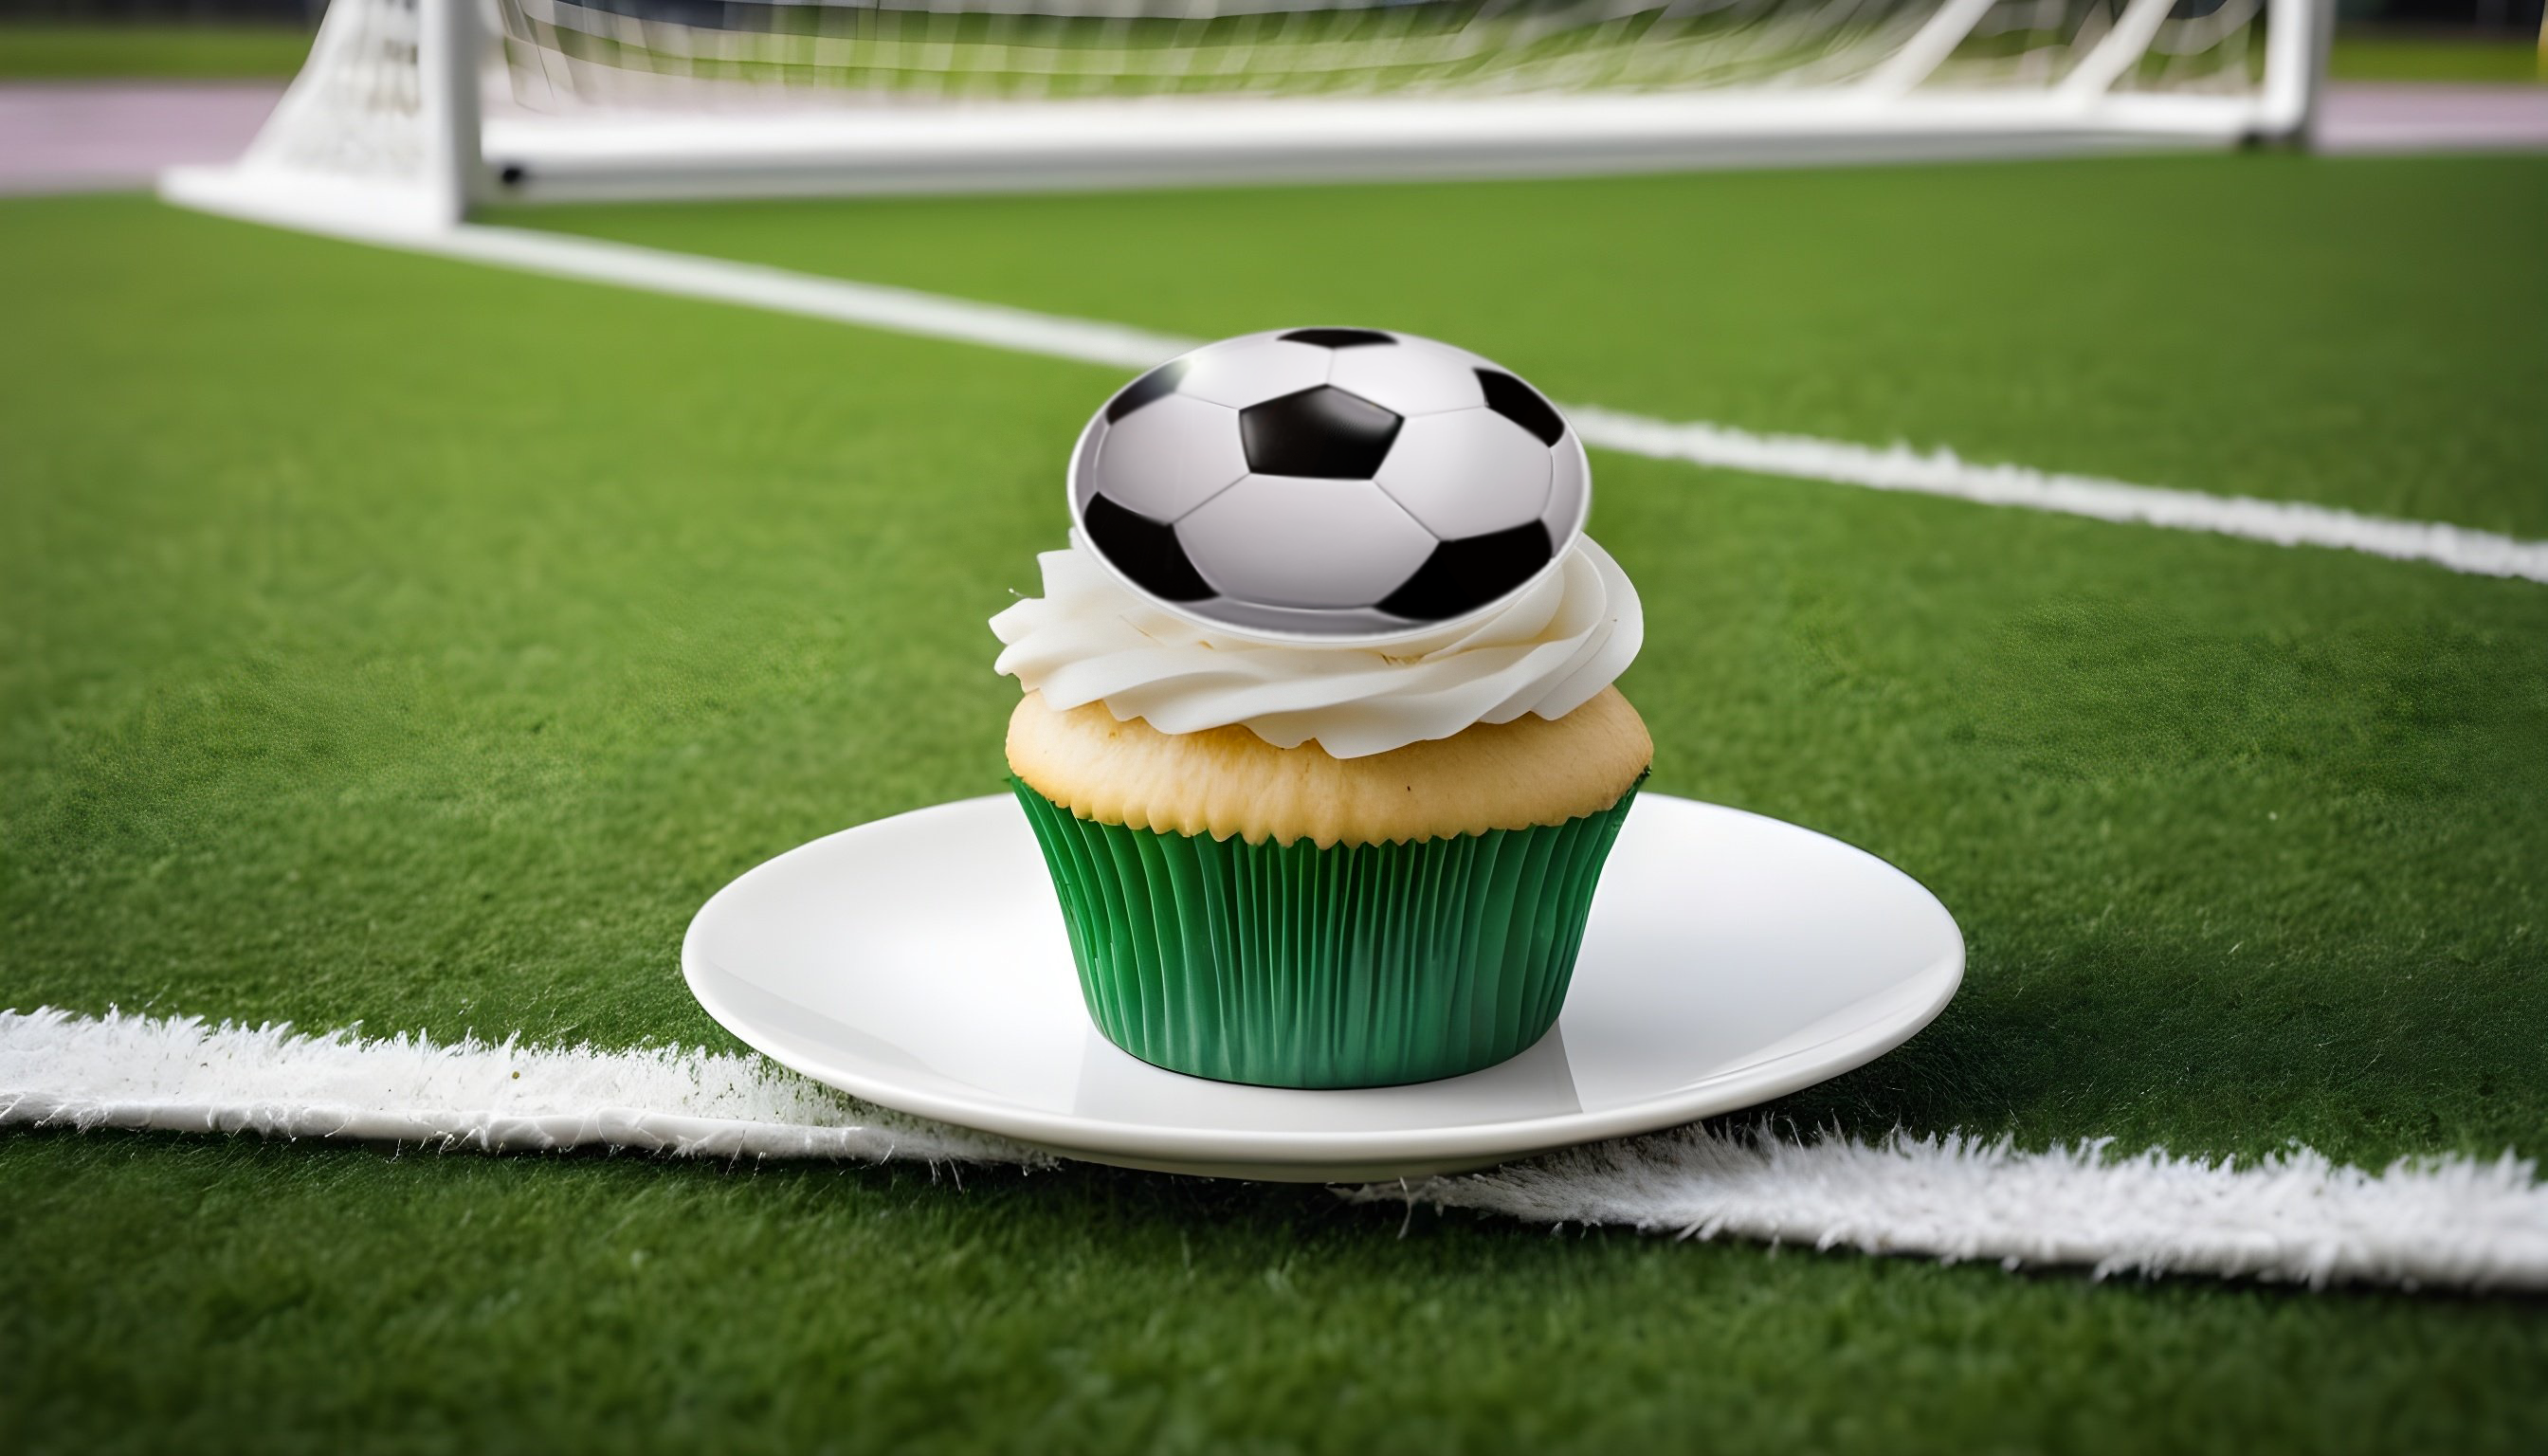 Football cupcake with black and white football cupcake topper